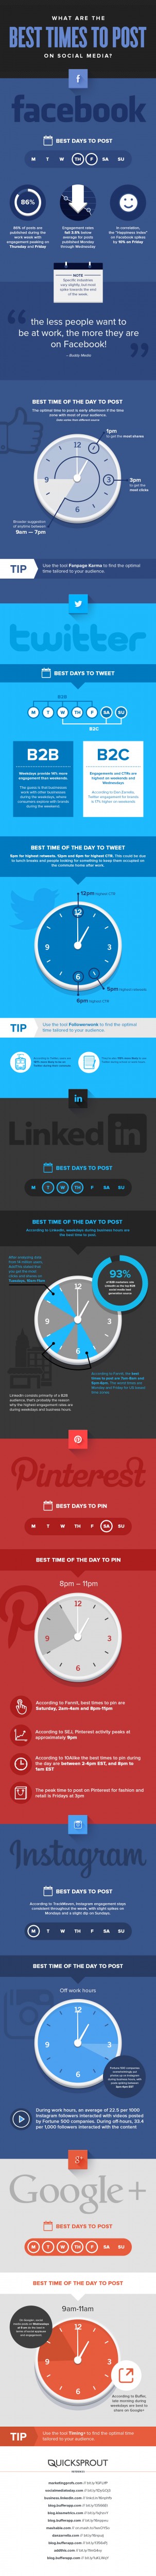 Best time to post on social in reach and clicks